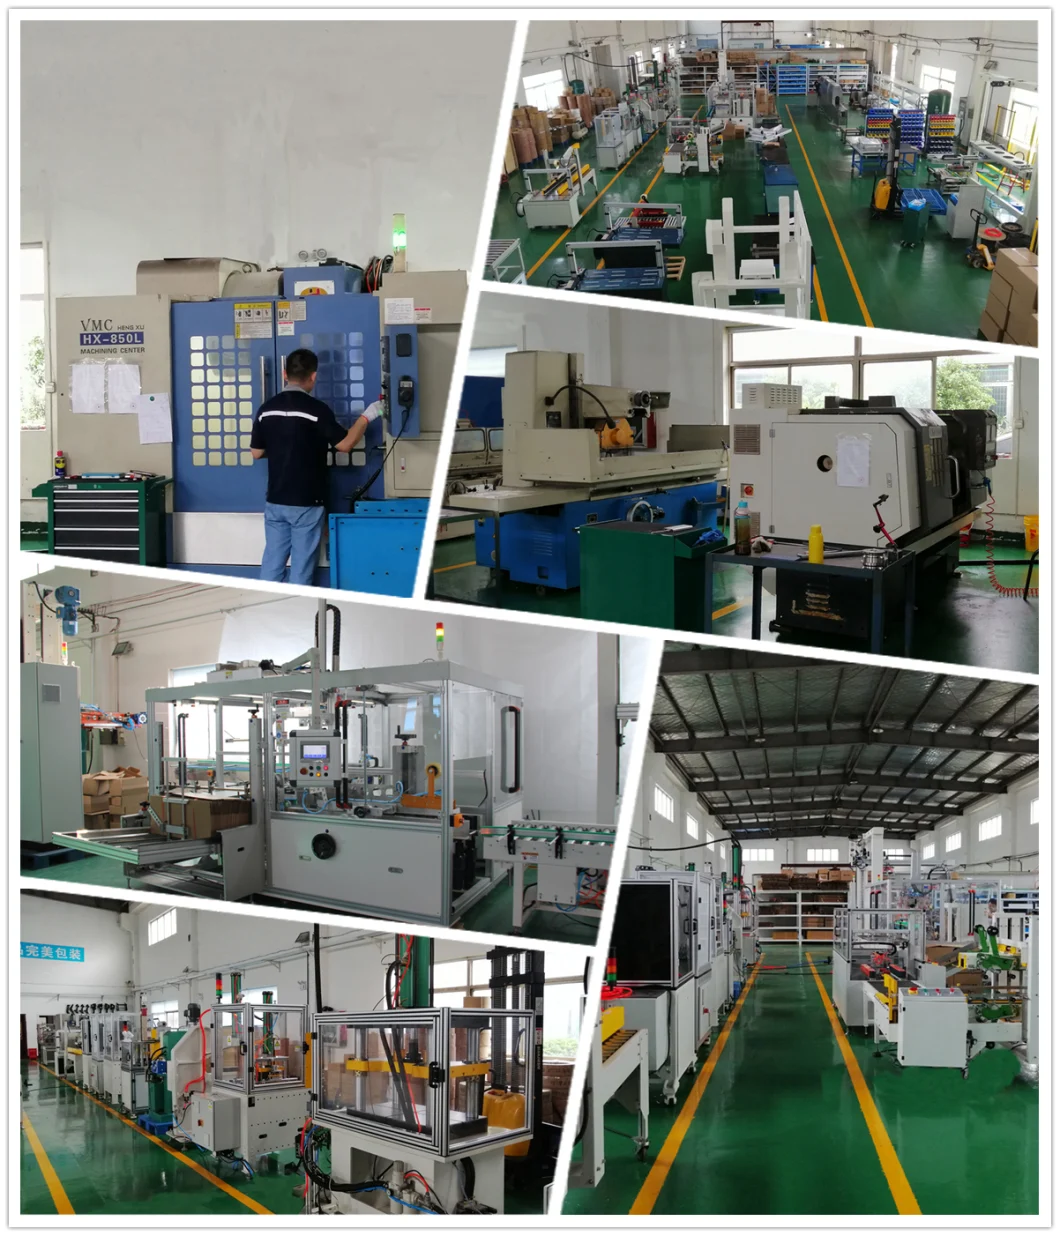 Automatic Rocker Arm Case Packer/ Robot Carton Packing and Sealing Machine for Bottles